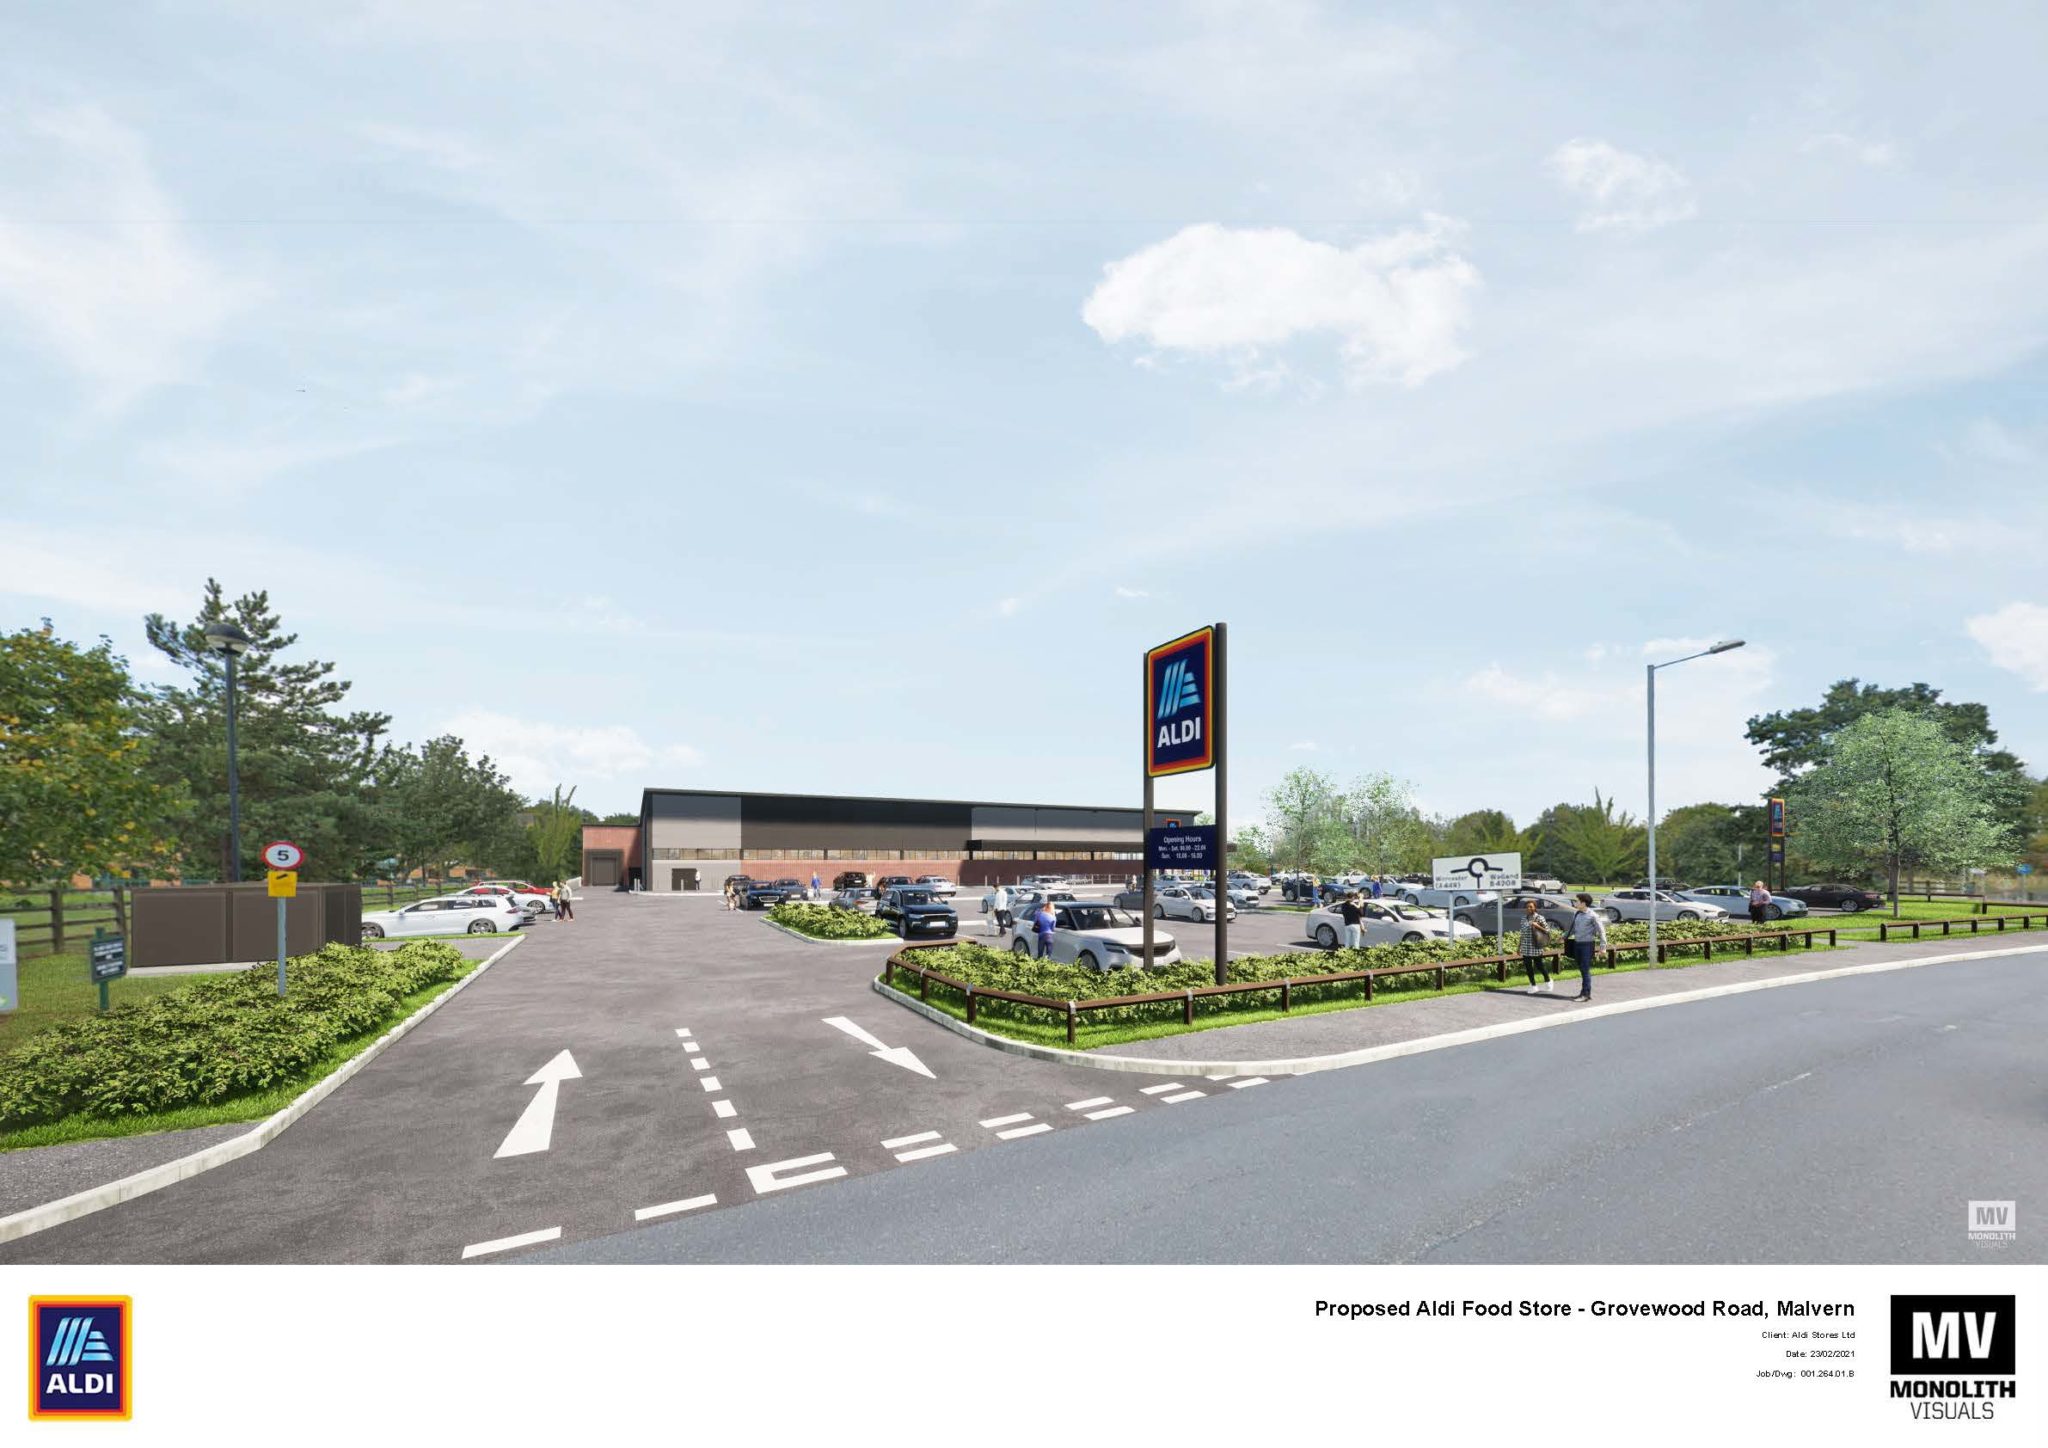 NEWS | Aldi to open a sustainably built, modern food store in Malvern later this year